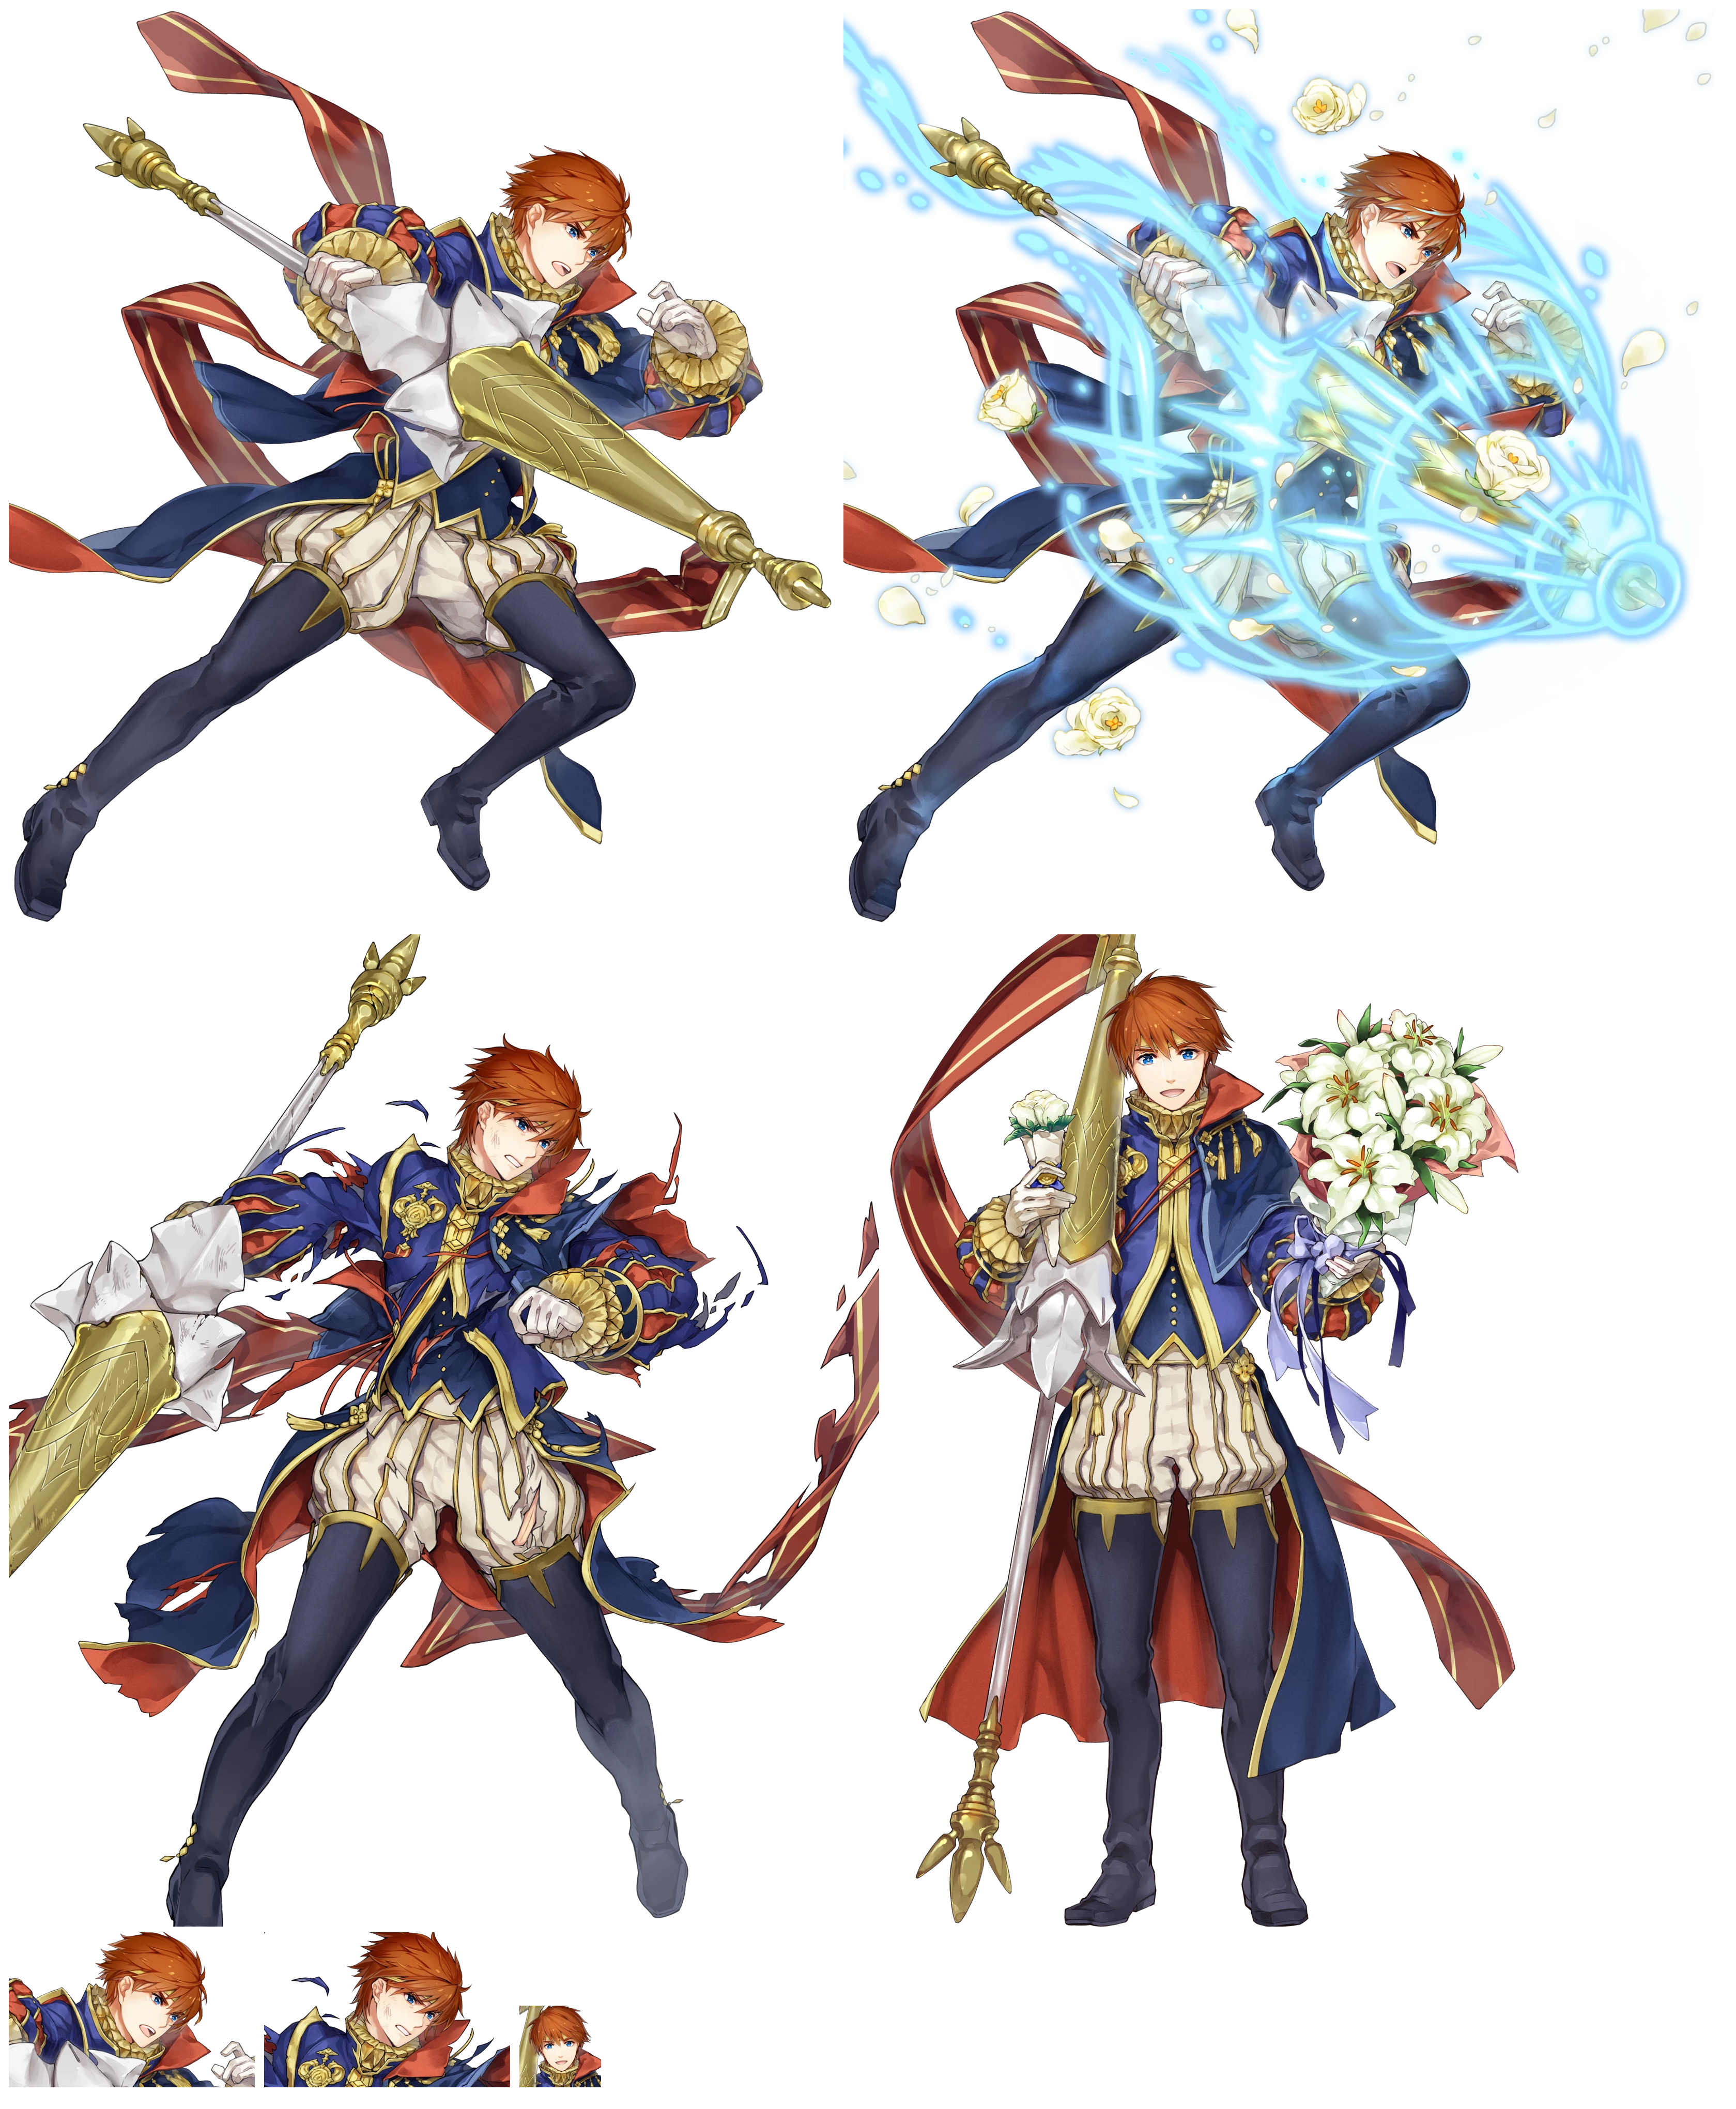 Eliwood (Love Abounds)